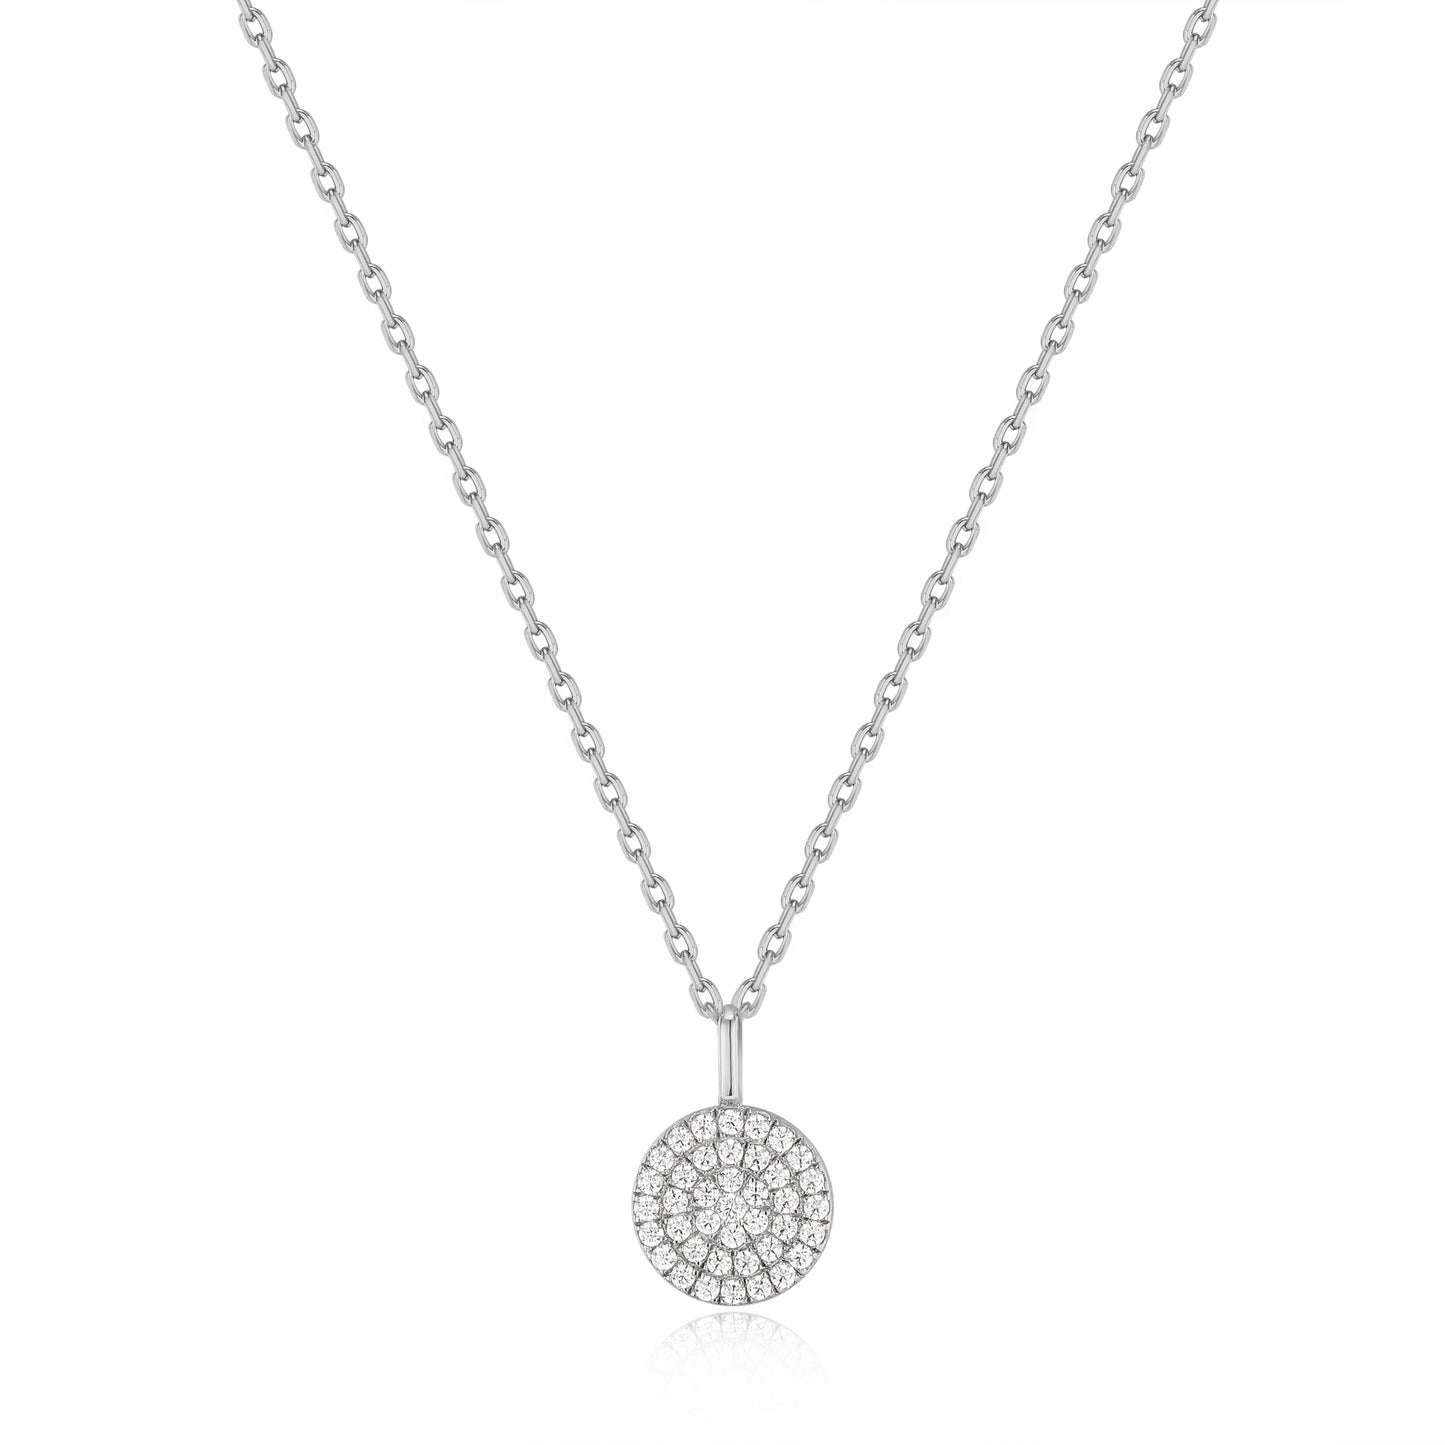 Ania Haie Rhodium Plated Silver Glam Disc CZ Necklace